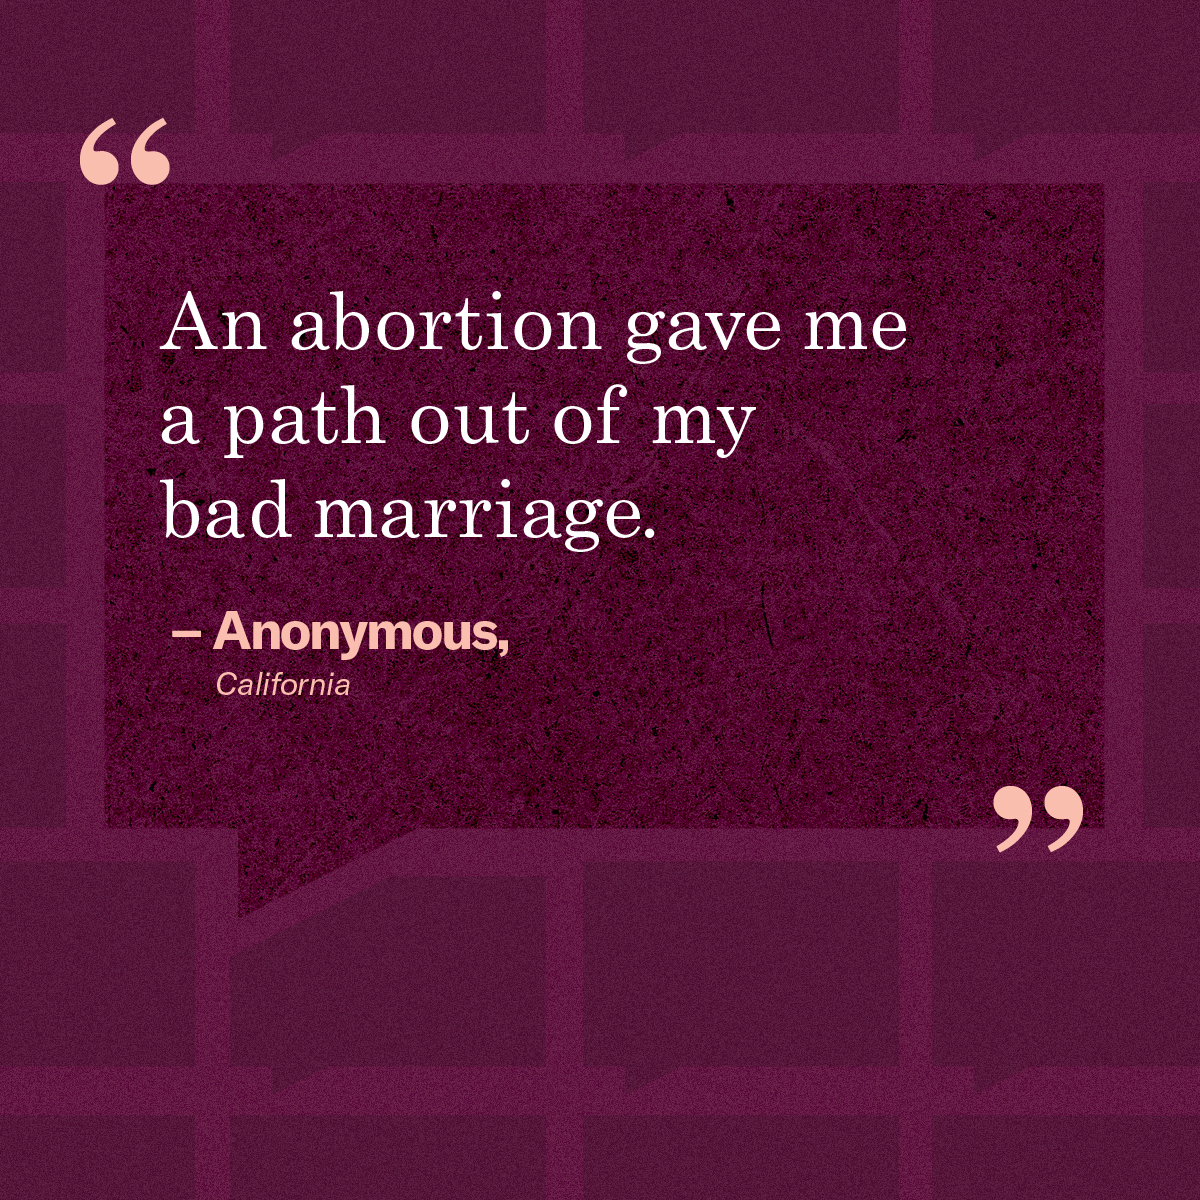 “An abortion gave me a path out of my bad marriage.” – Anonymous, California